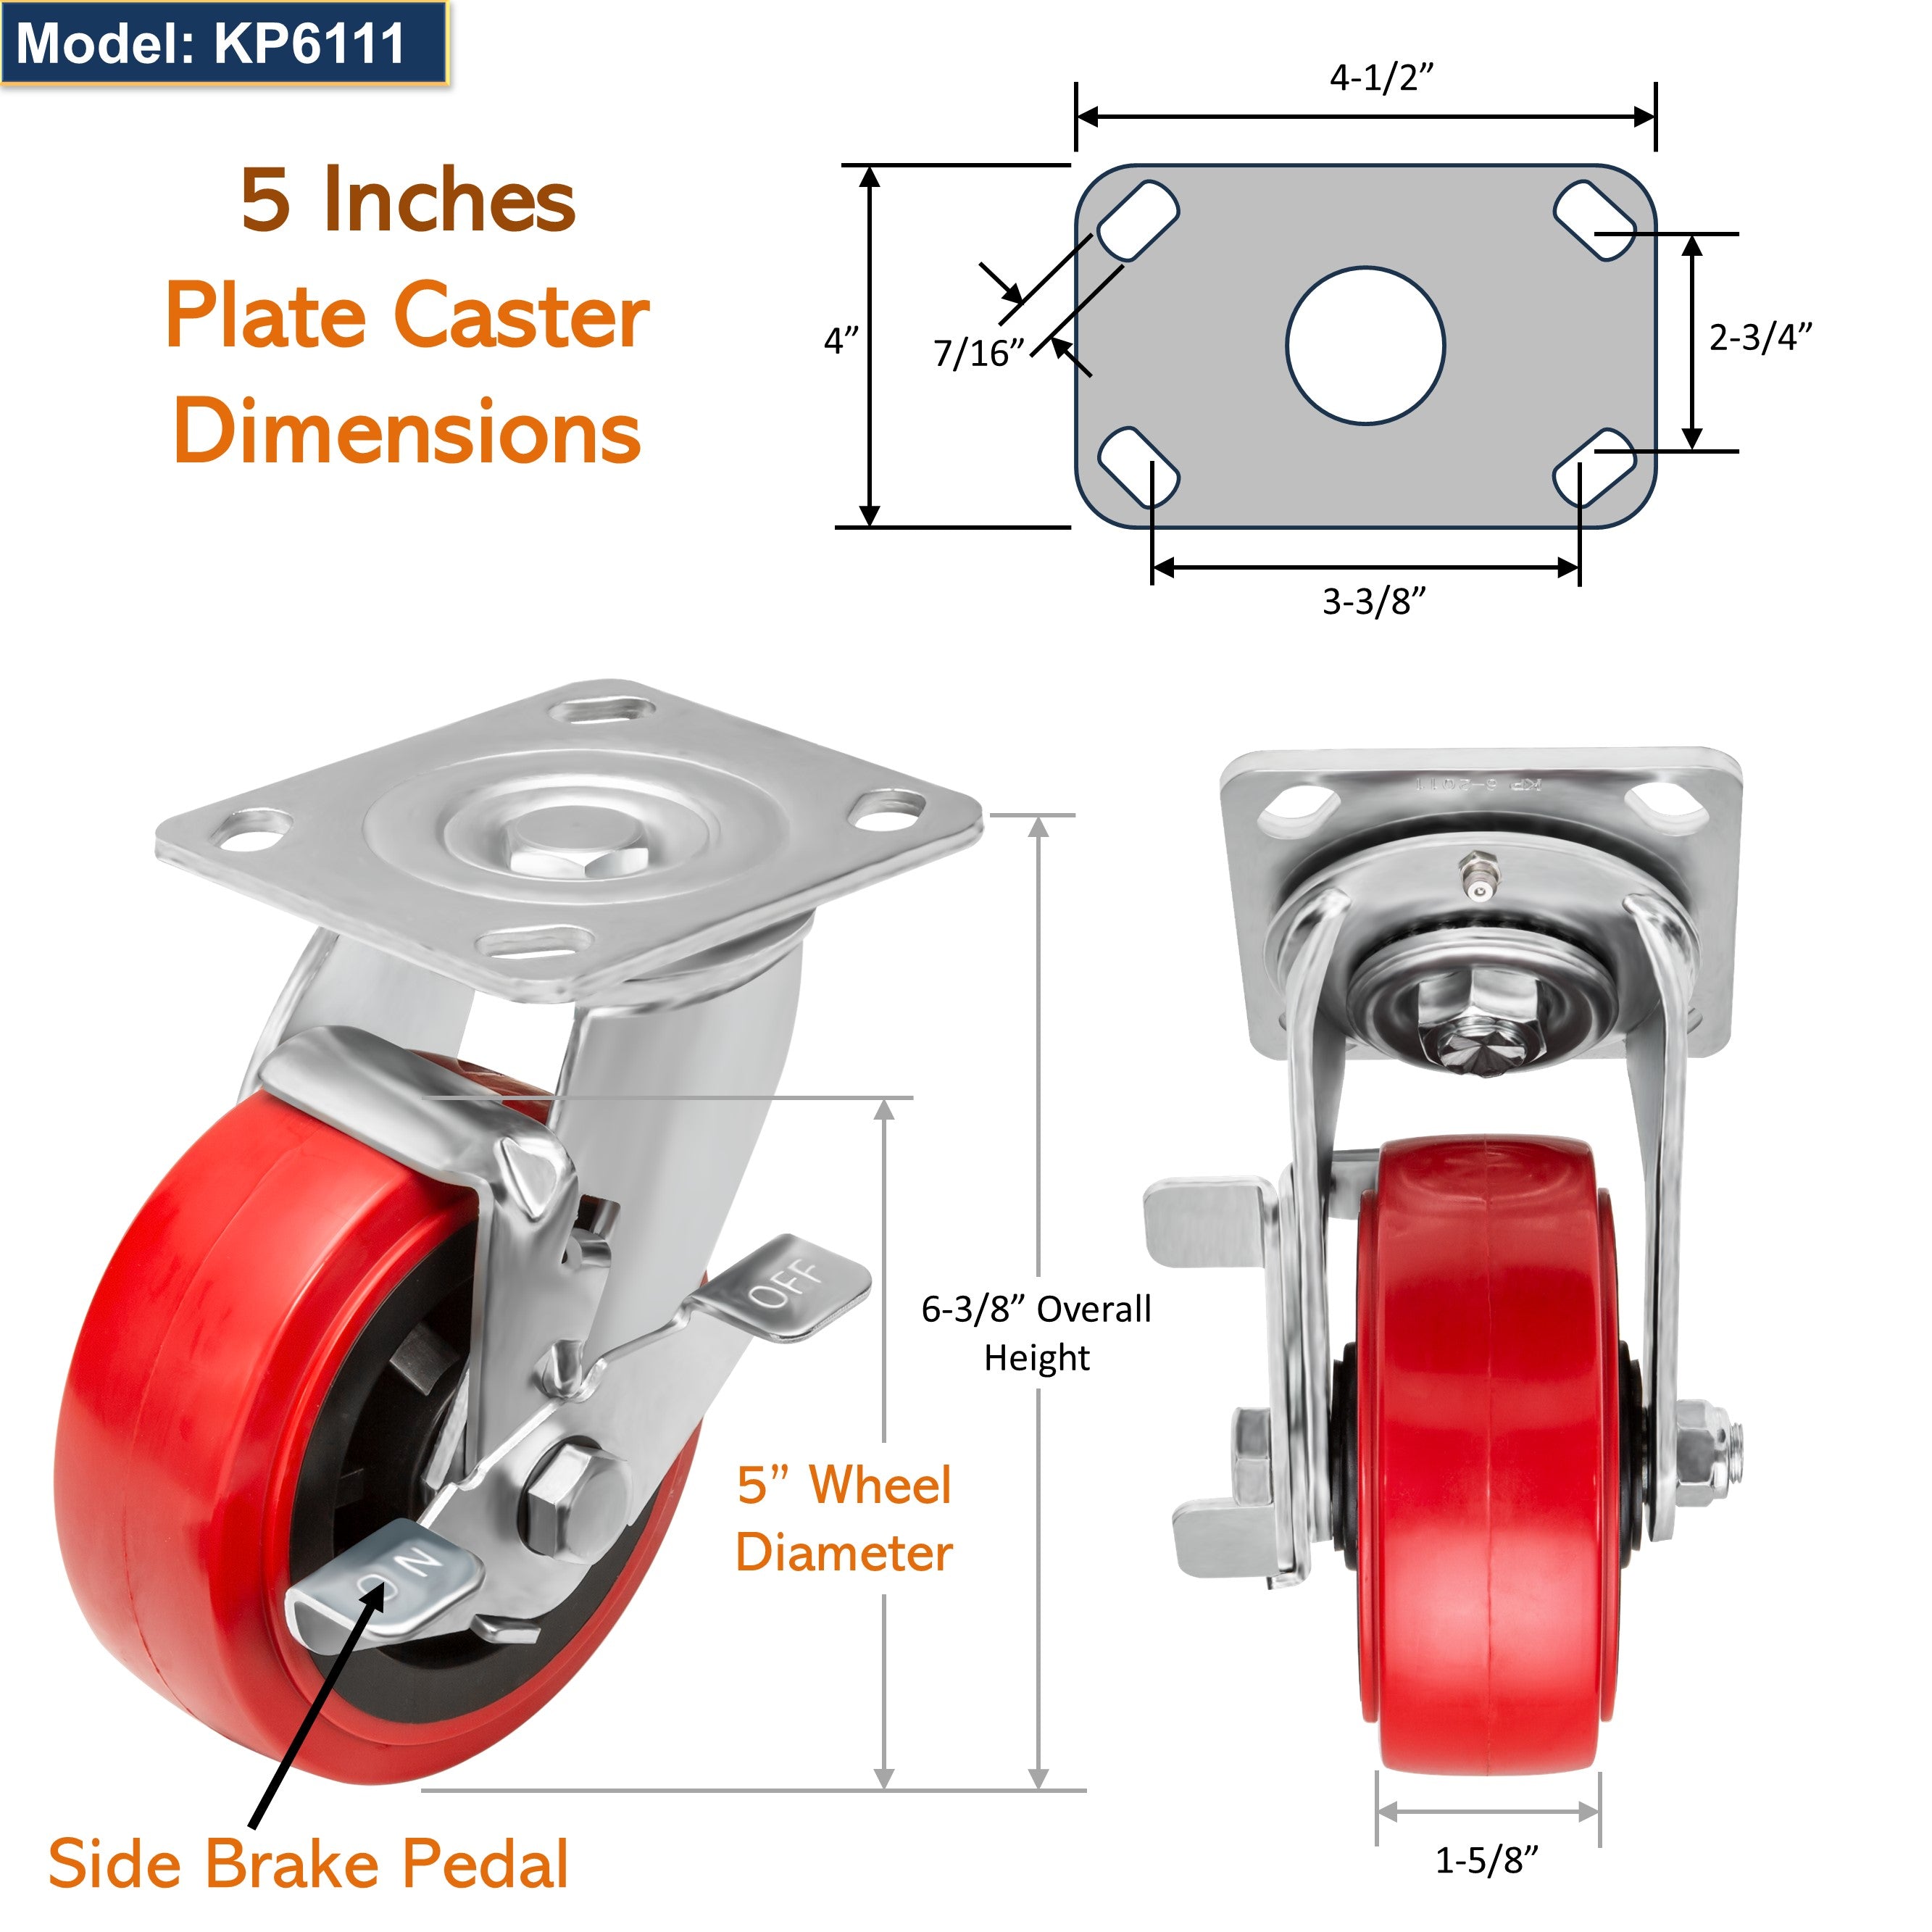 GSW 5" Industrial Casters - Heavy Duty Casters, Set of 4 Plate Casters with Loading Capacity of 2400 Lbs, Use for Heavy Equipment, Carts, and Workbench (4 Brakes)